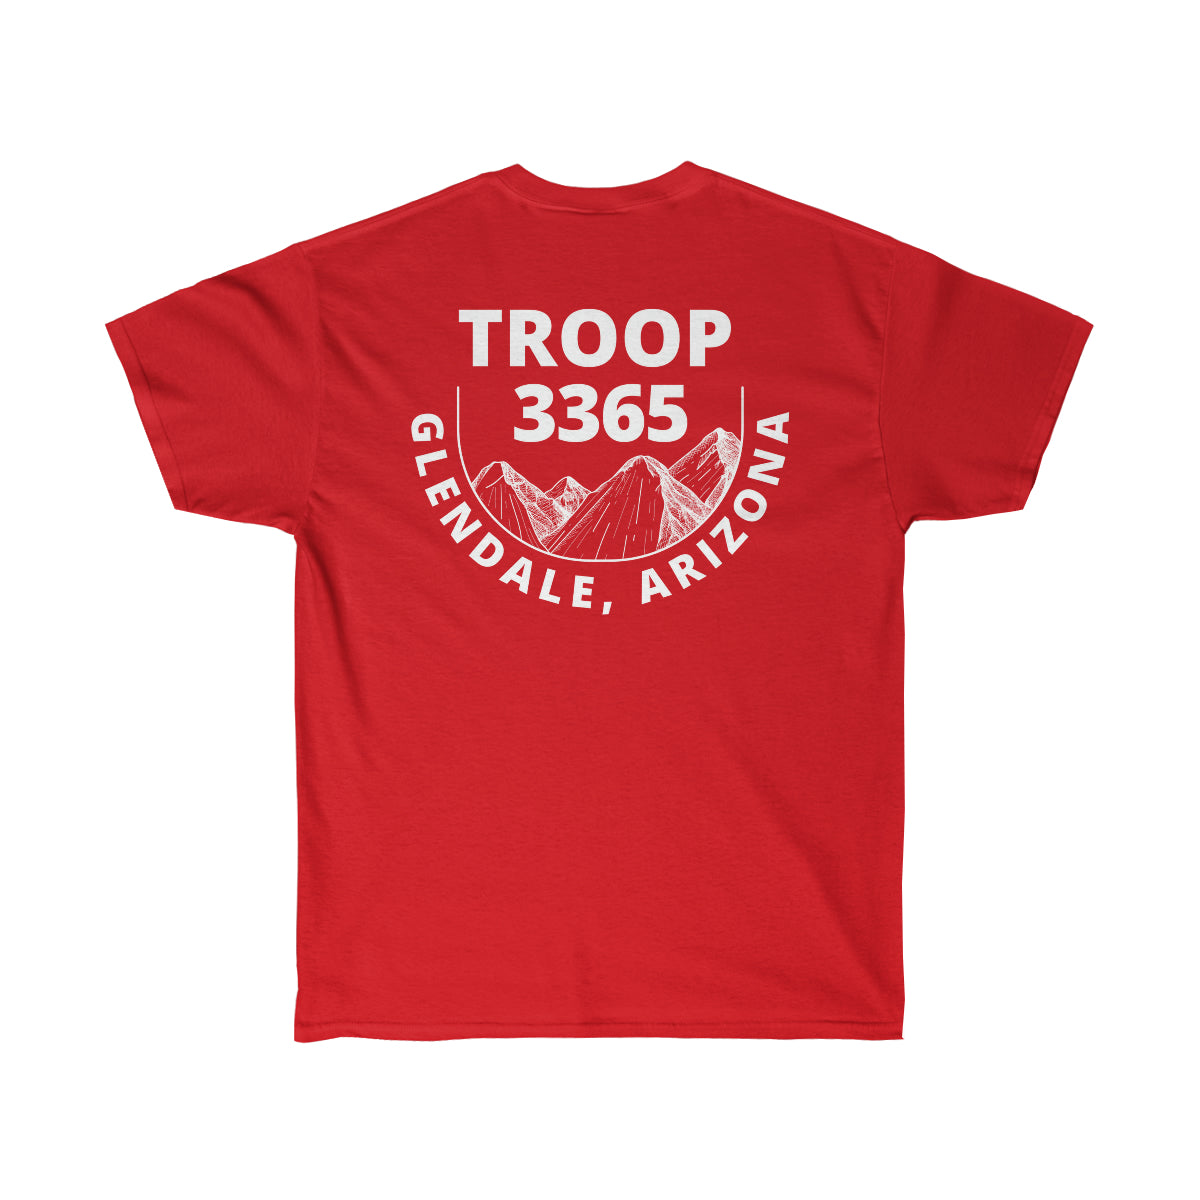 Deck your Pack / Troop / Crew / Ship out in THEIR style - FULLY CUSTOMIZABLE!